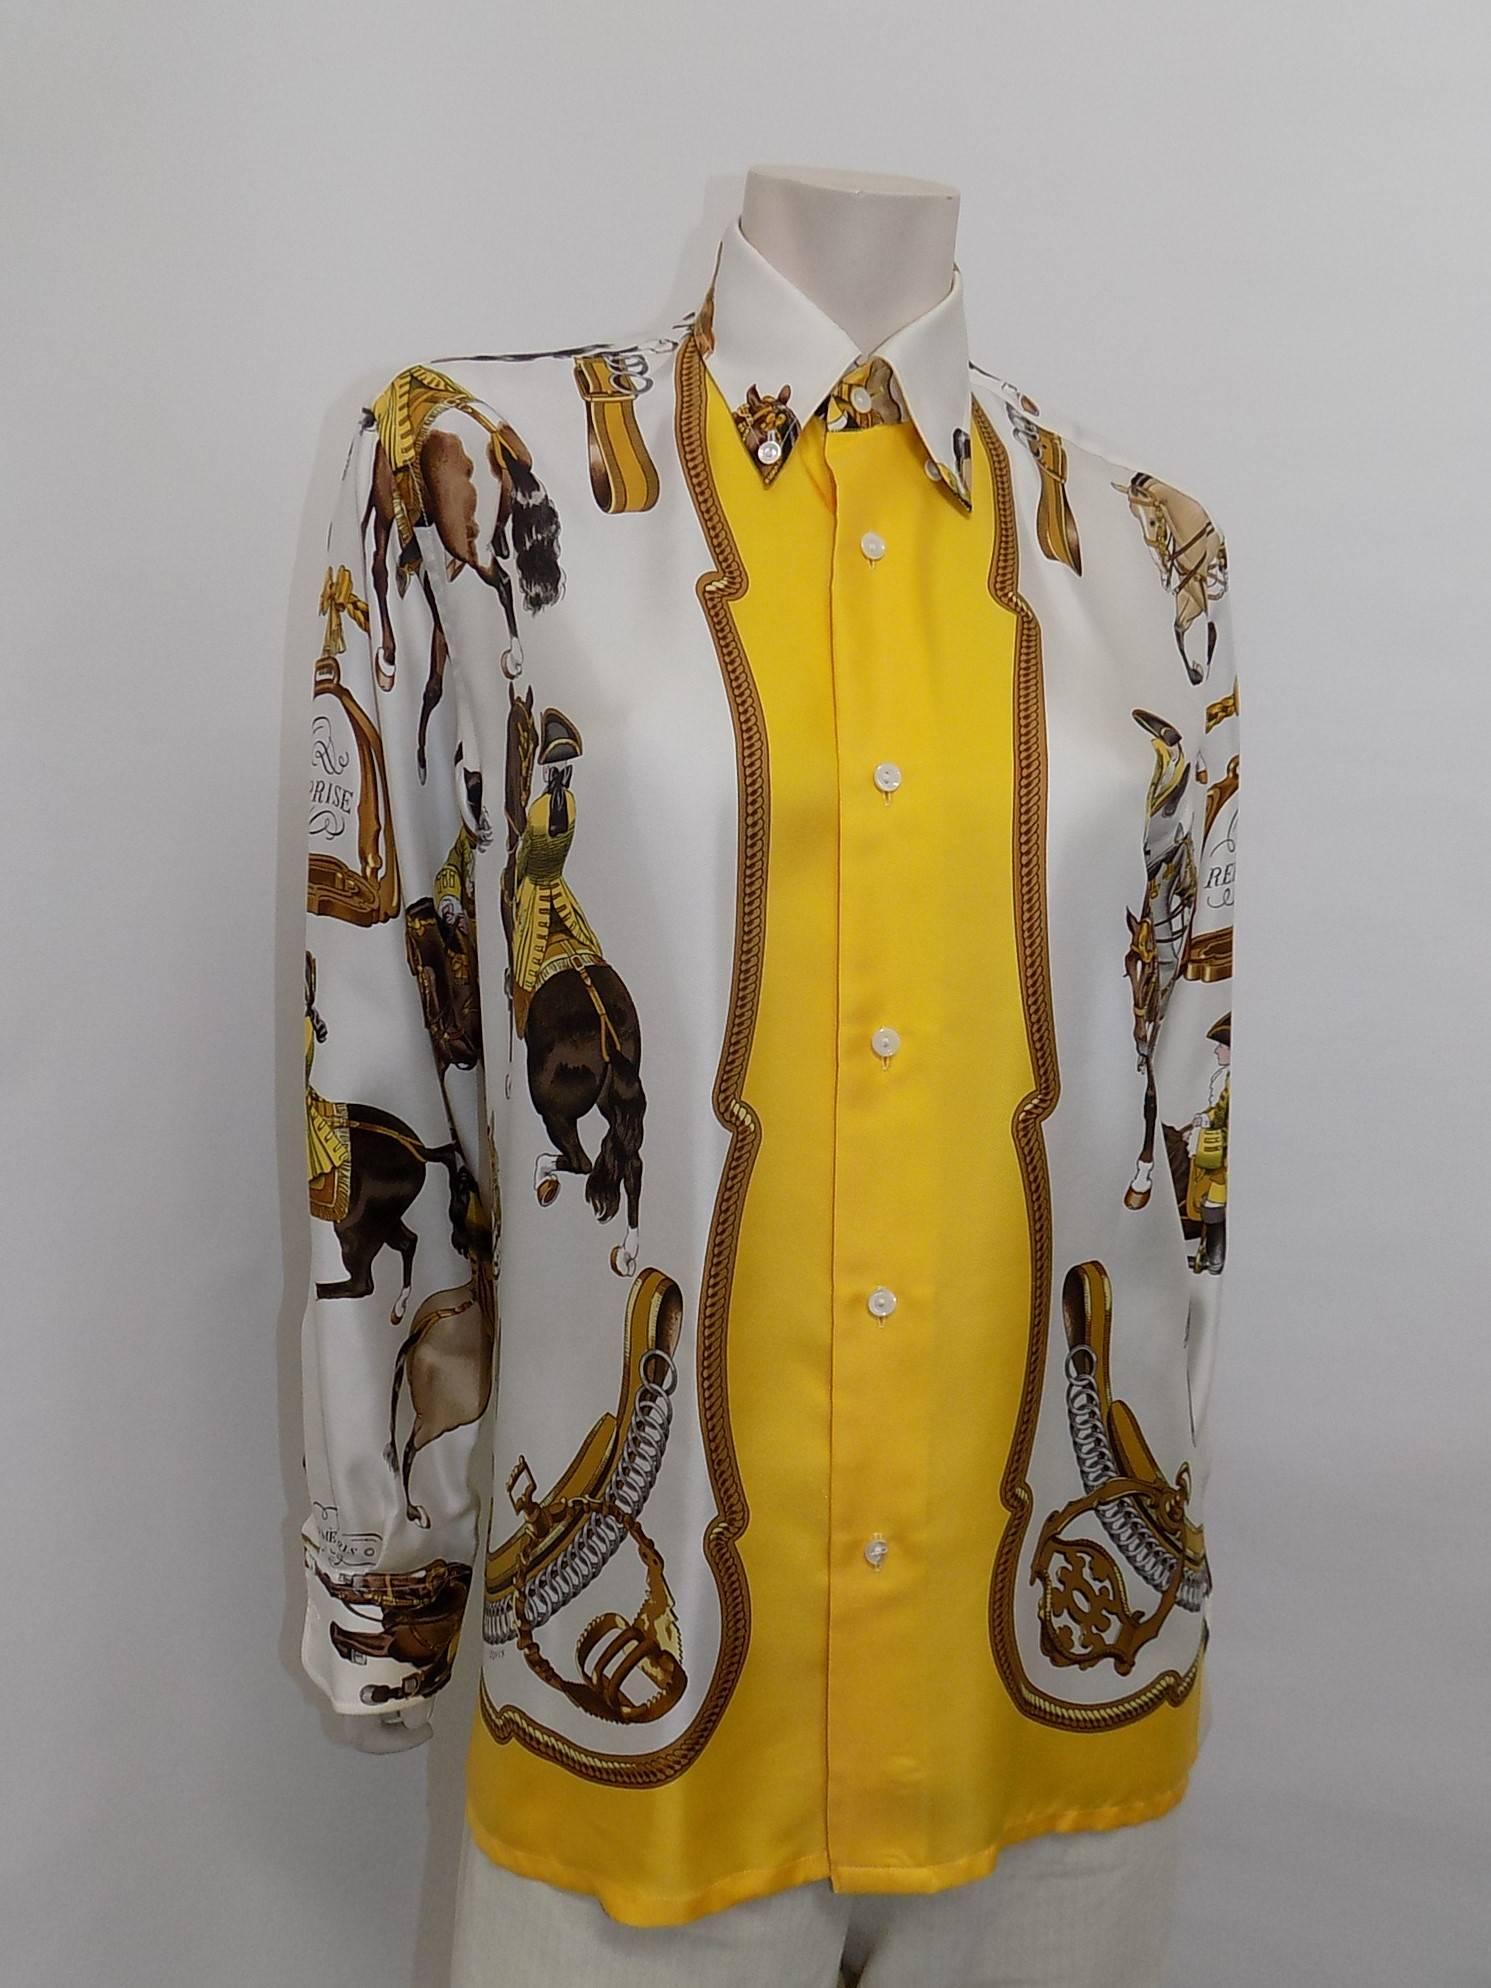 Pristine condition , like new. white with yellow , gold and brown  coloring Hermes vintage silk equestrian button down shirt blouse "Reprise".by  foulard  ledoux
Size 40. Men's button side but it could be worn by woman.
Bust 44